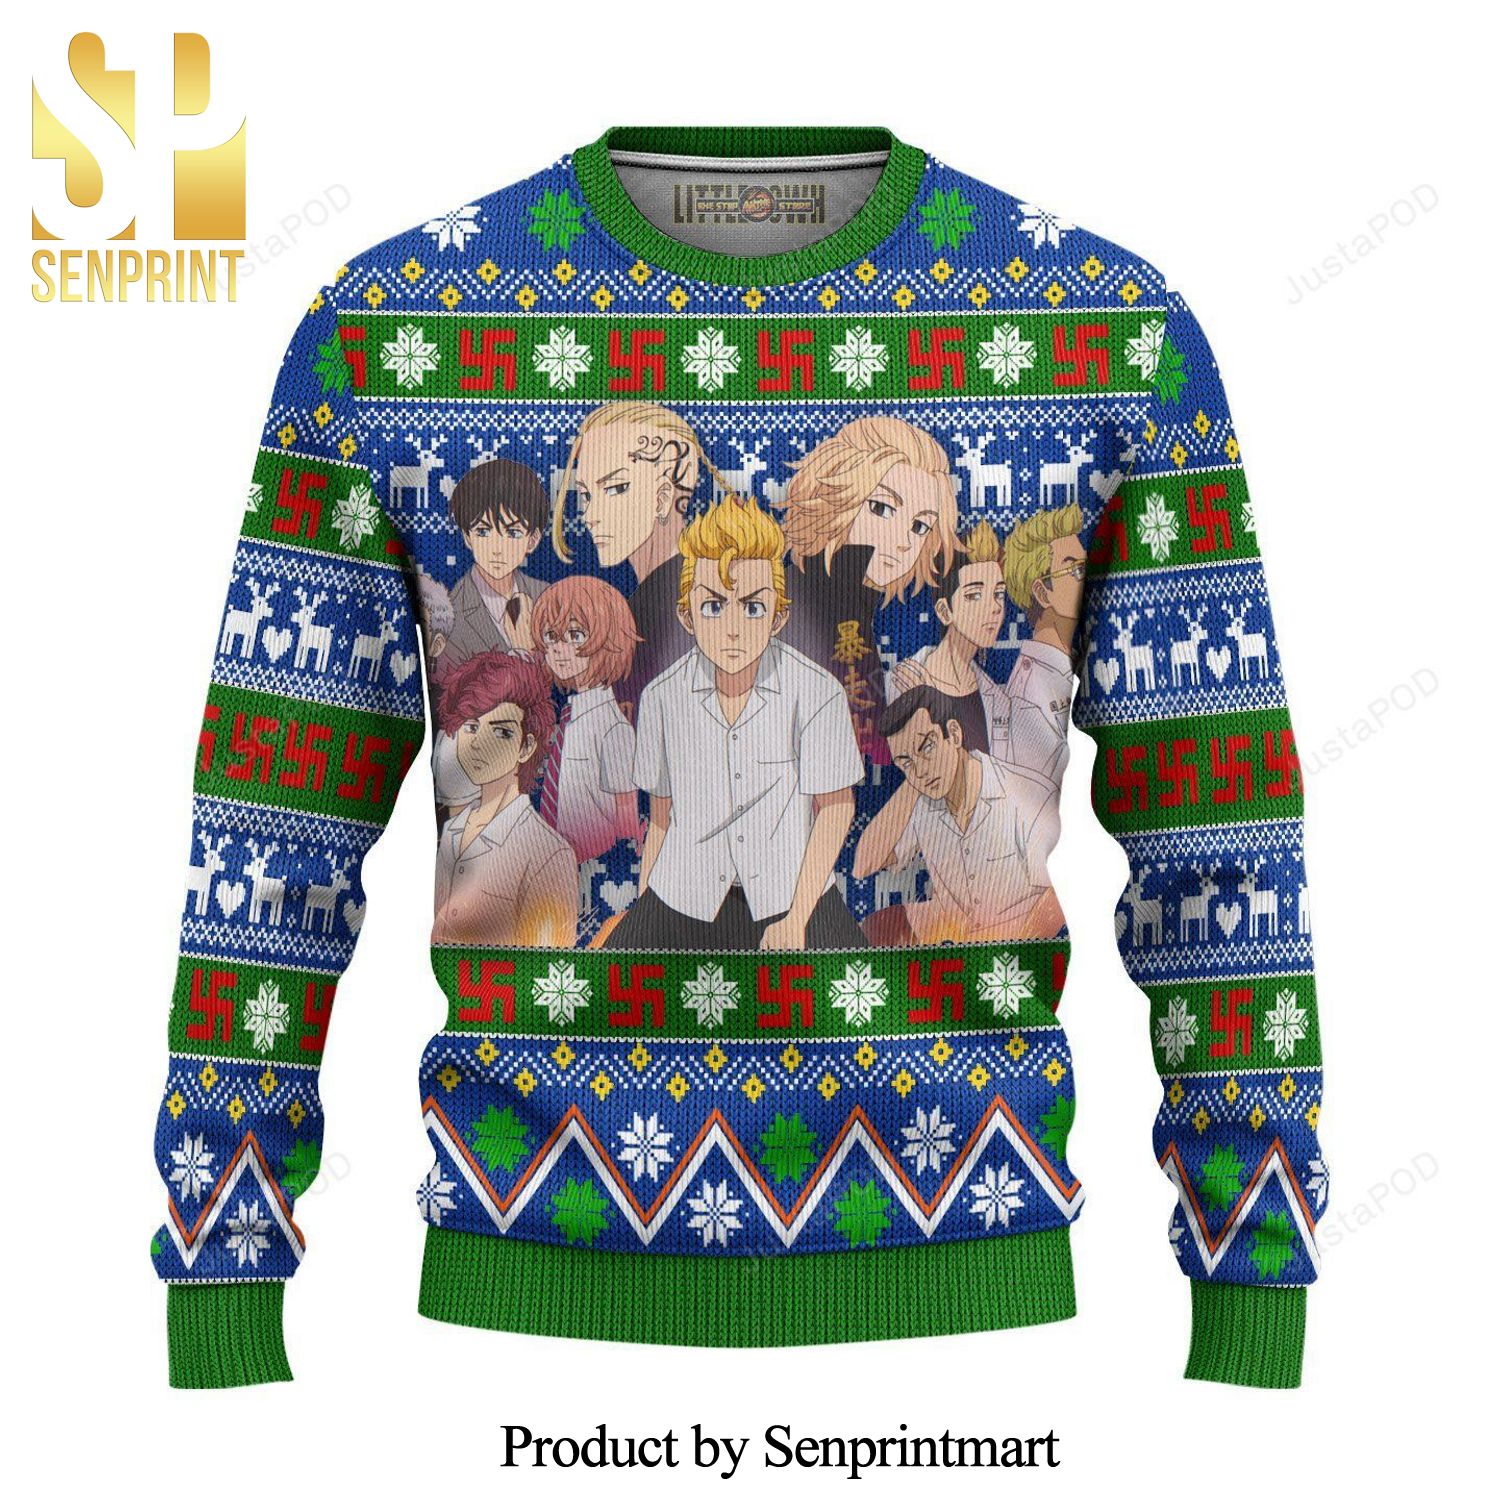 Tokyo Revengers Anime Knitted Ugly Christmas Sweater